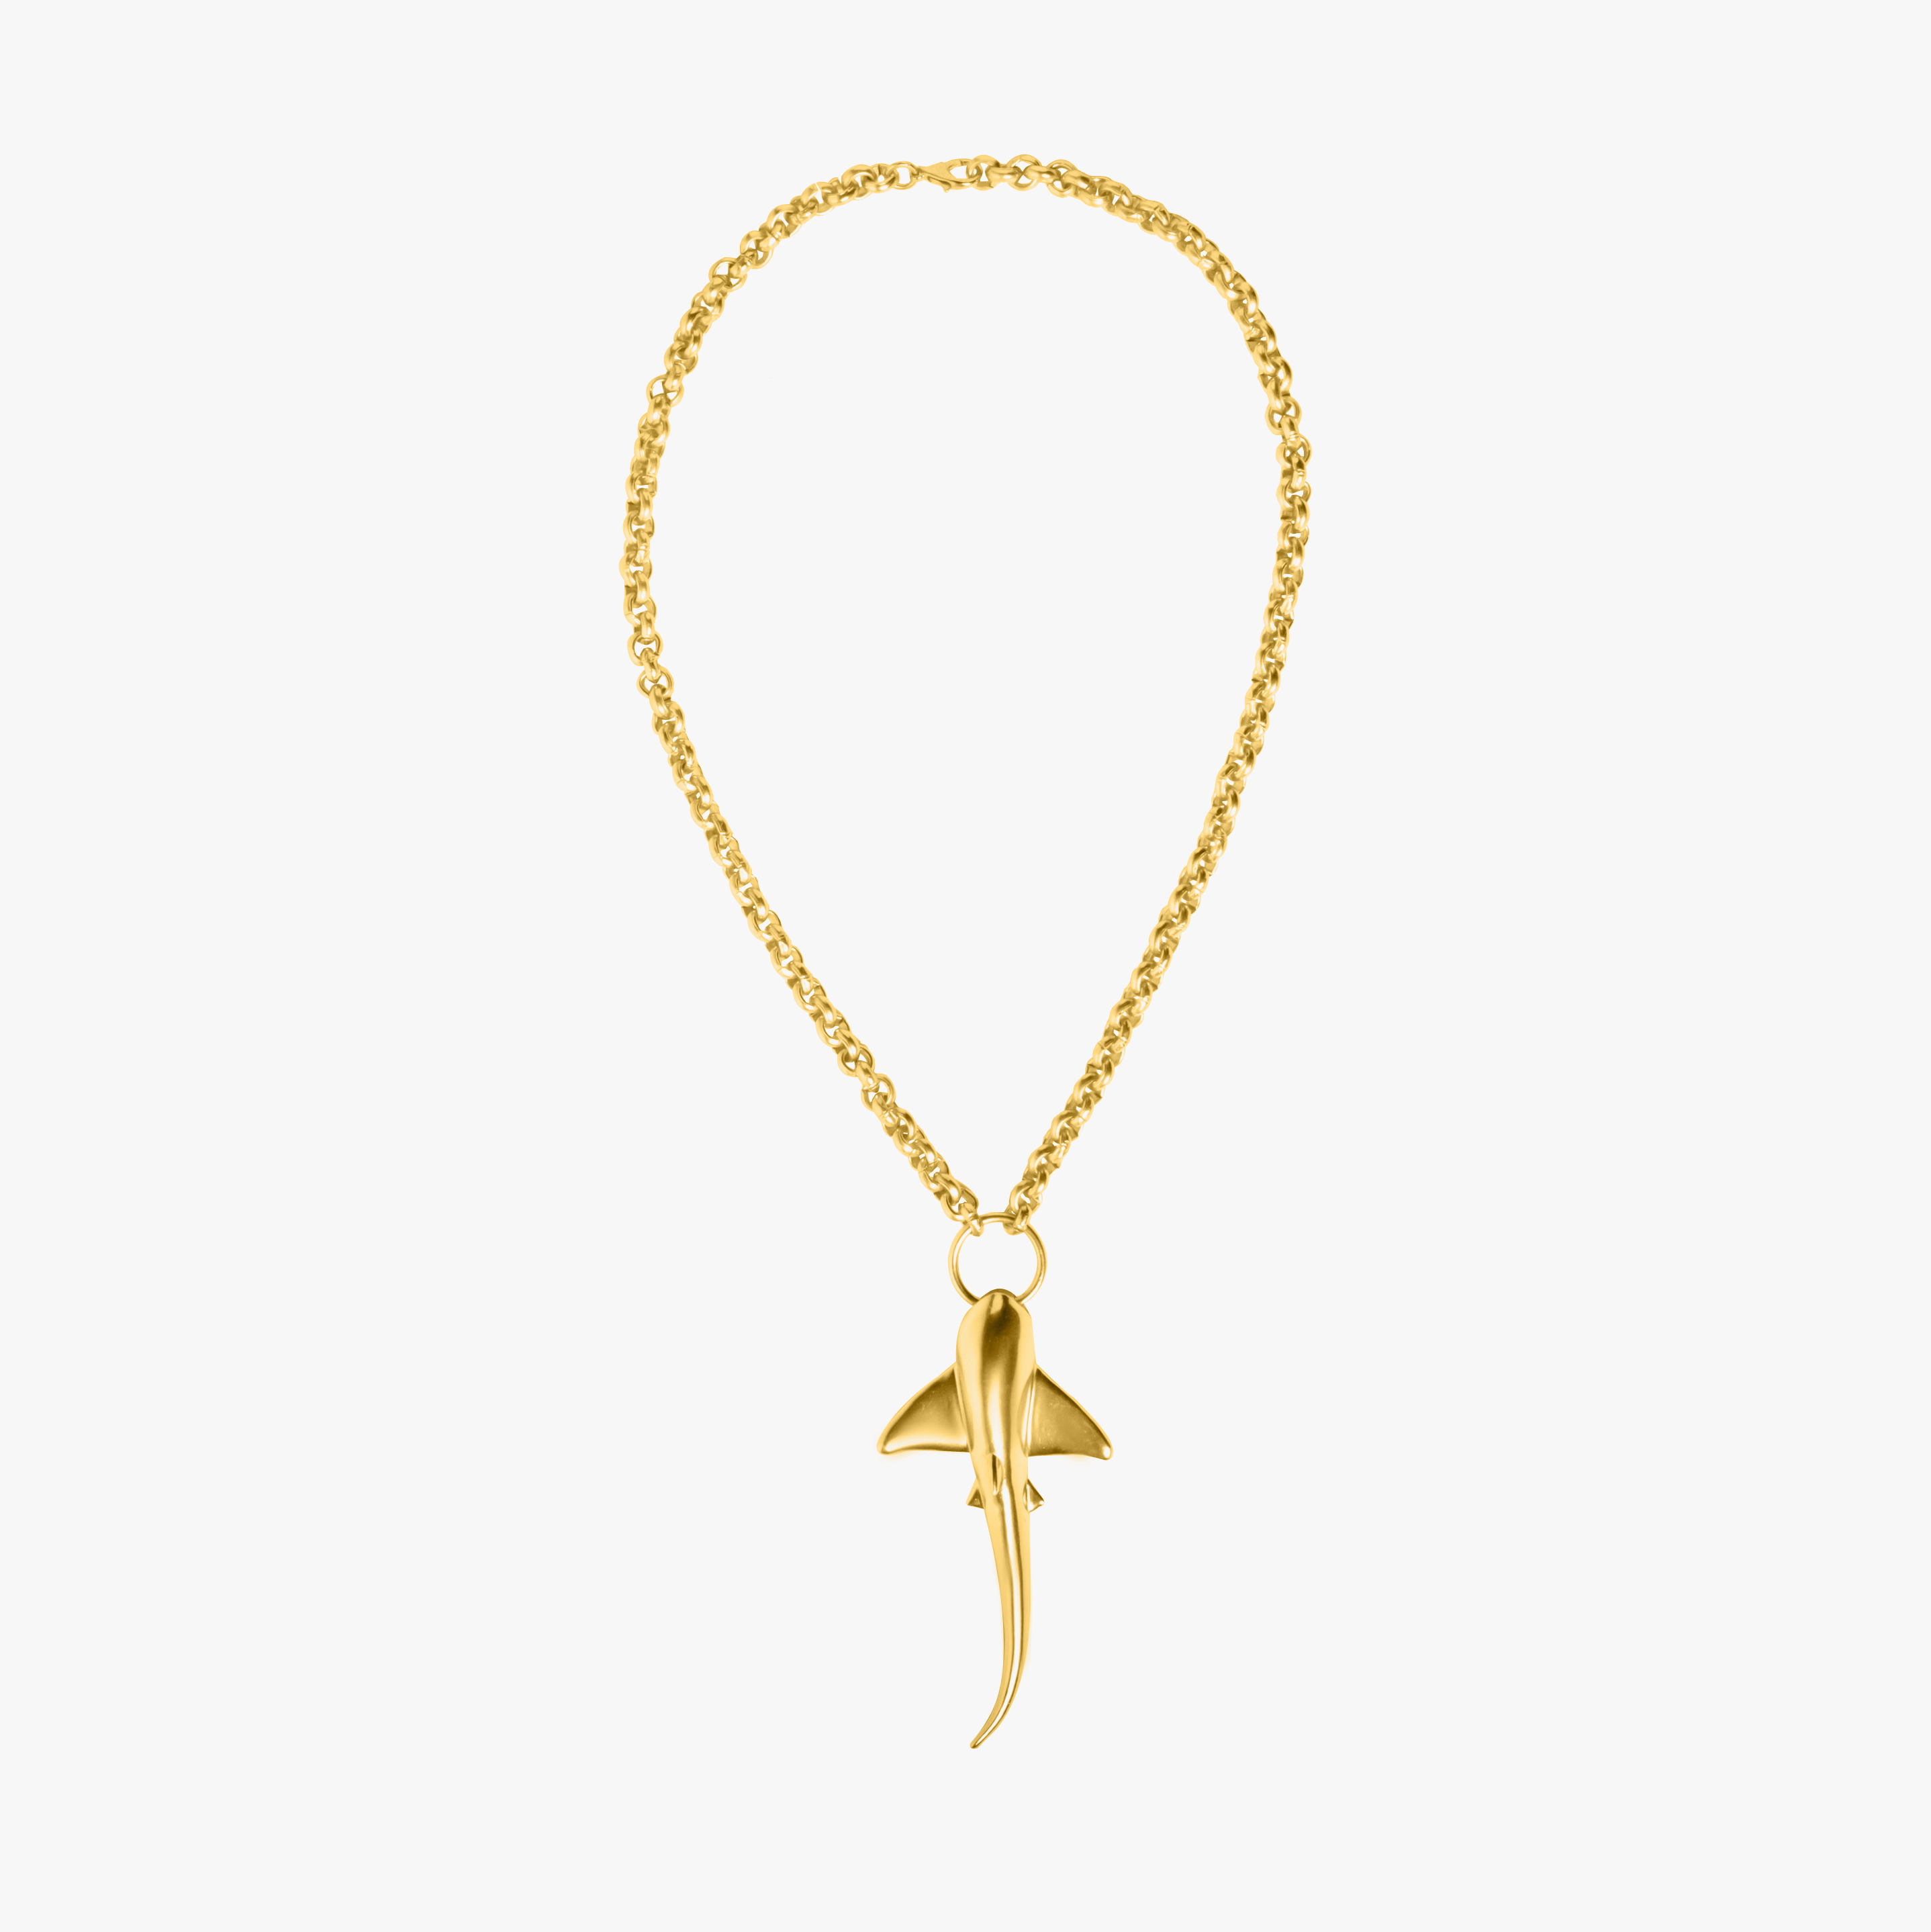 SHARK NECKLACE GOLD TONE , a product by Equiivalence